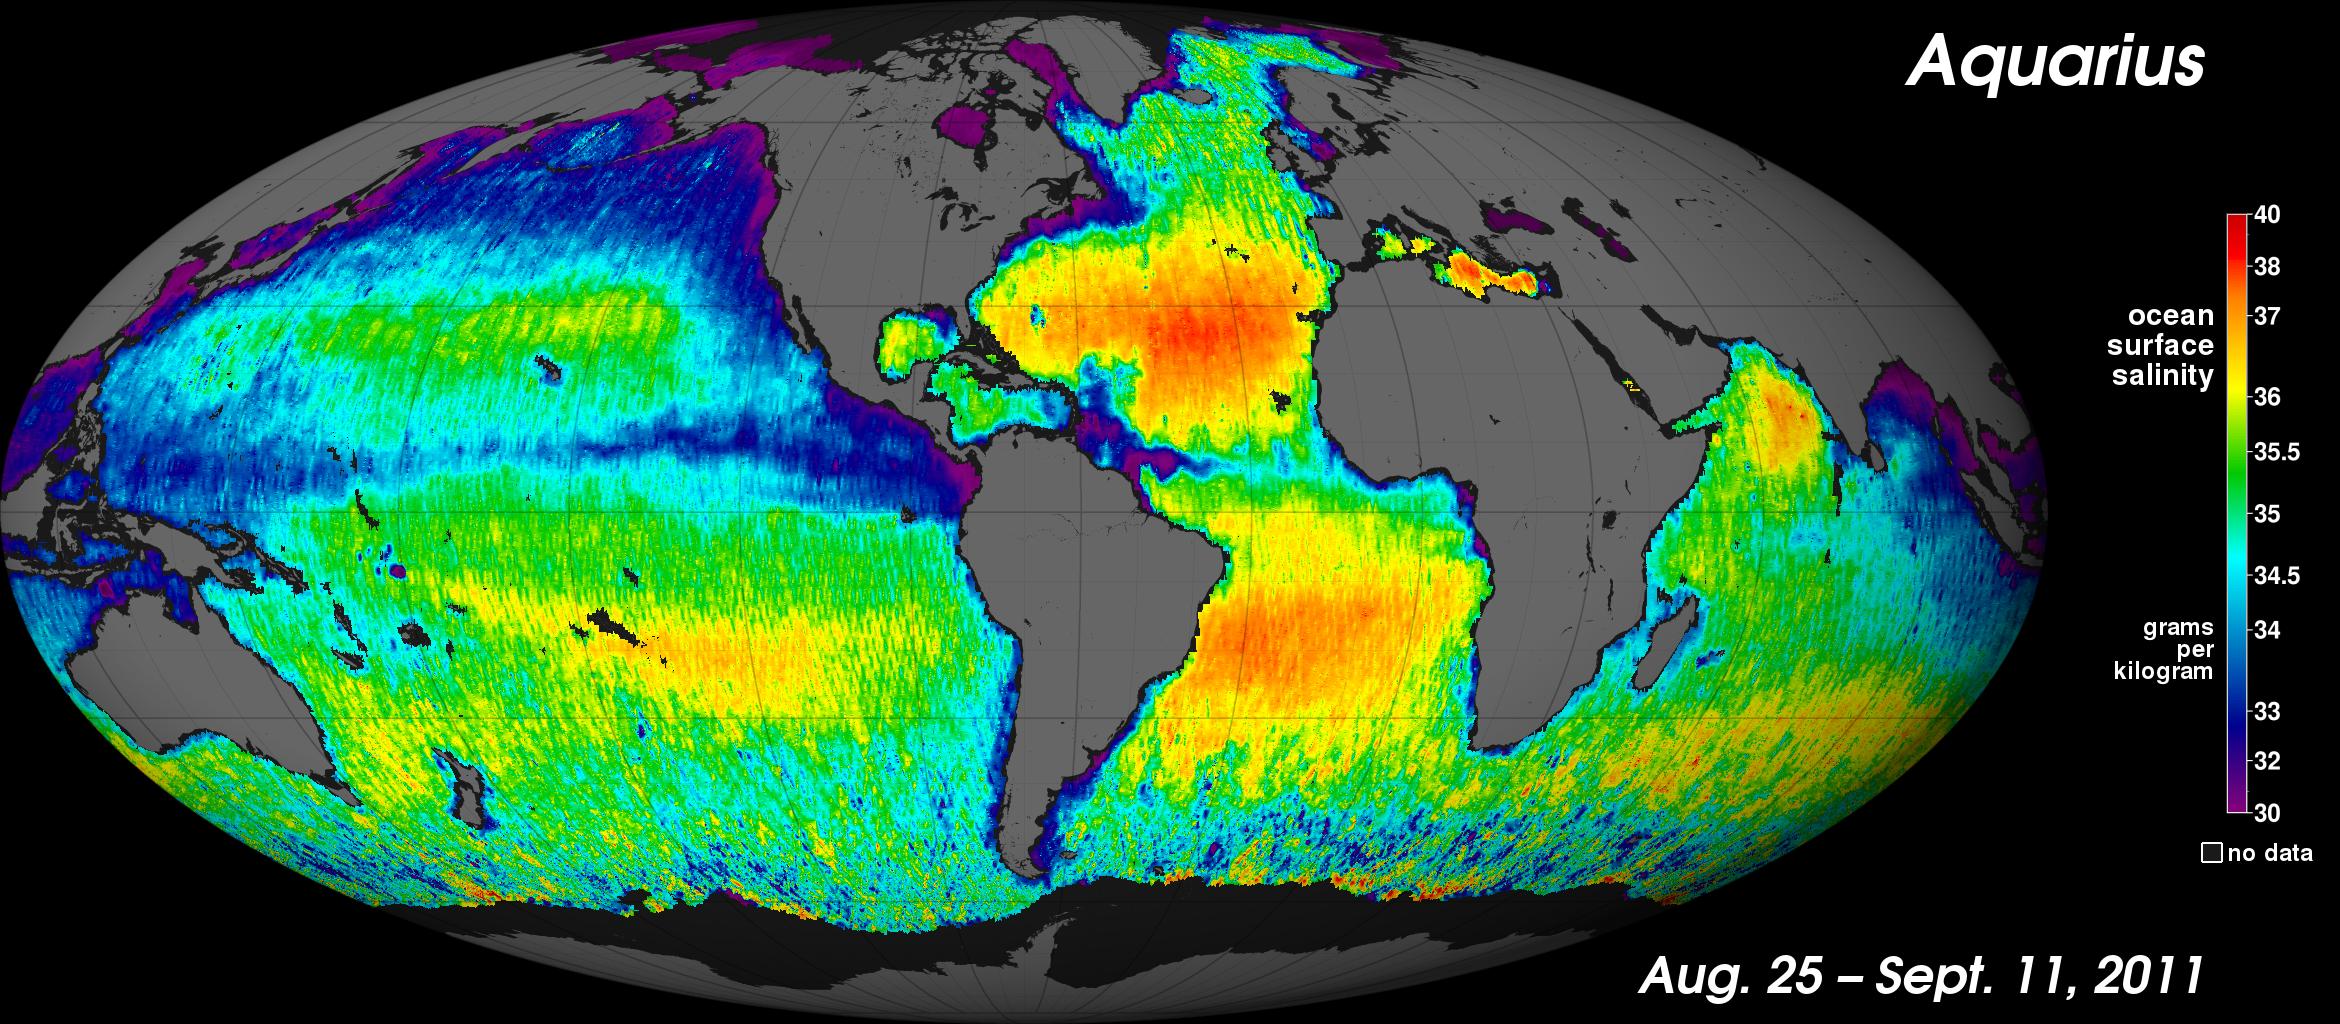 NASA's new Aquarius instrument has produced its first global map of the salinity, or saltiness, of Earth's ocean surface, providing an early glimpse of the mission's anticipated discoveries.